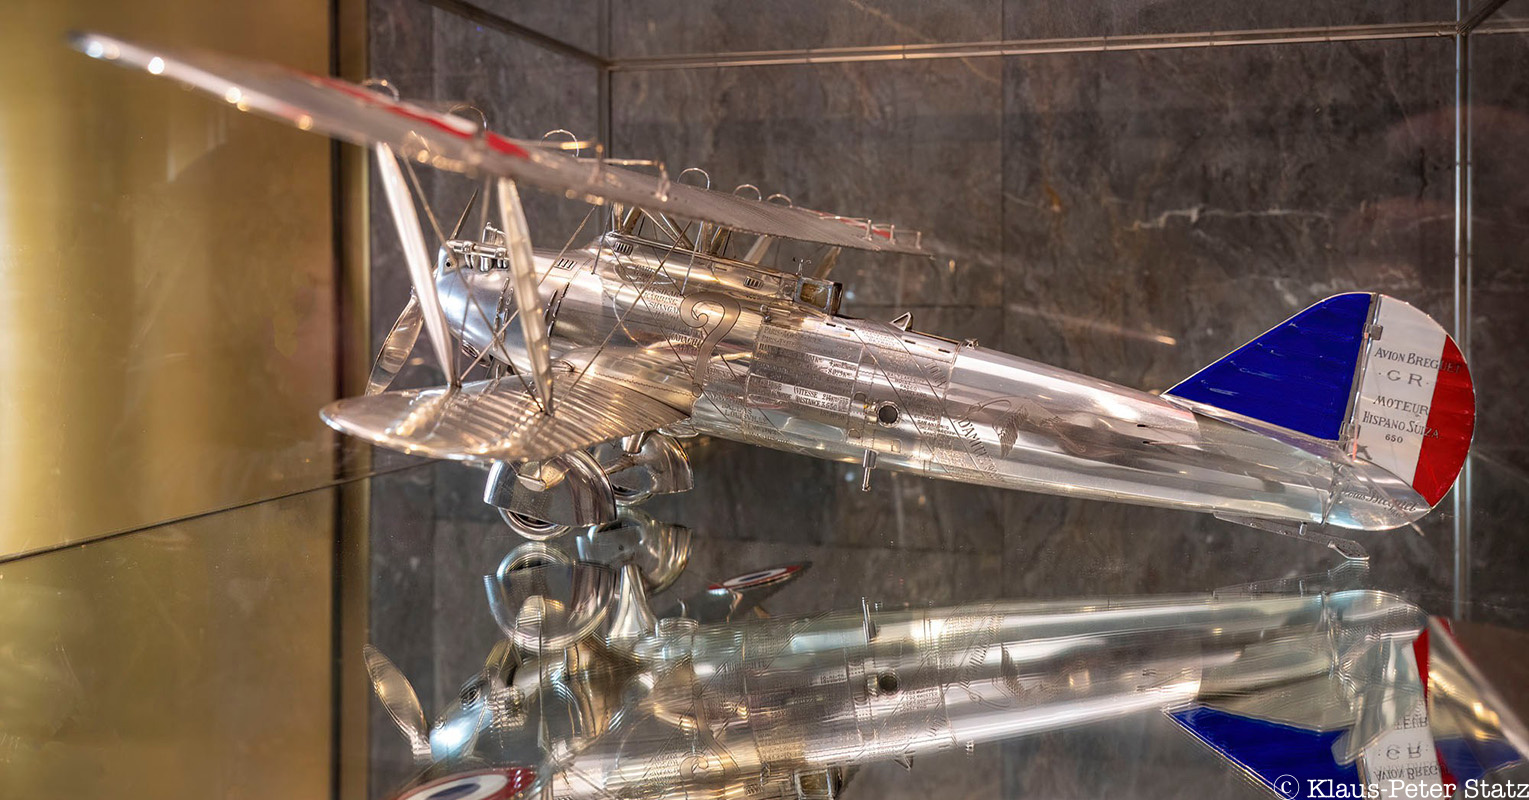 A side view of the sterling silver plane created by Cartier inside Rockefeller Center